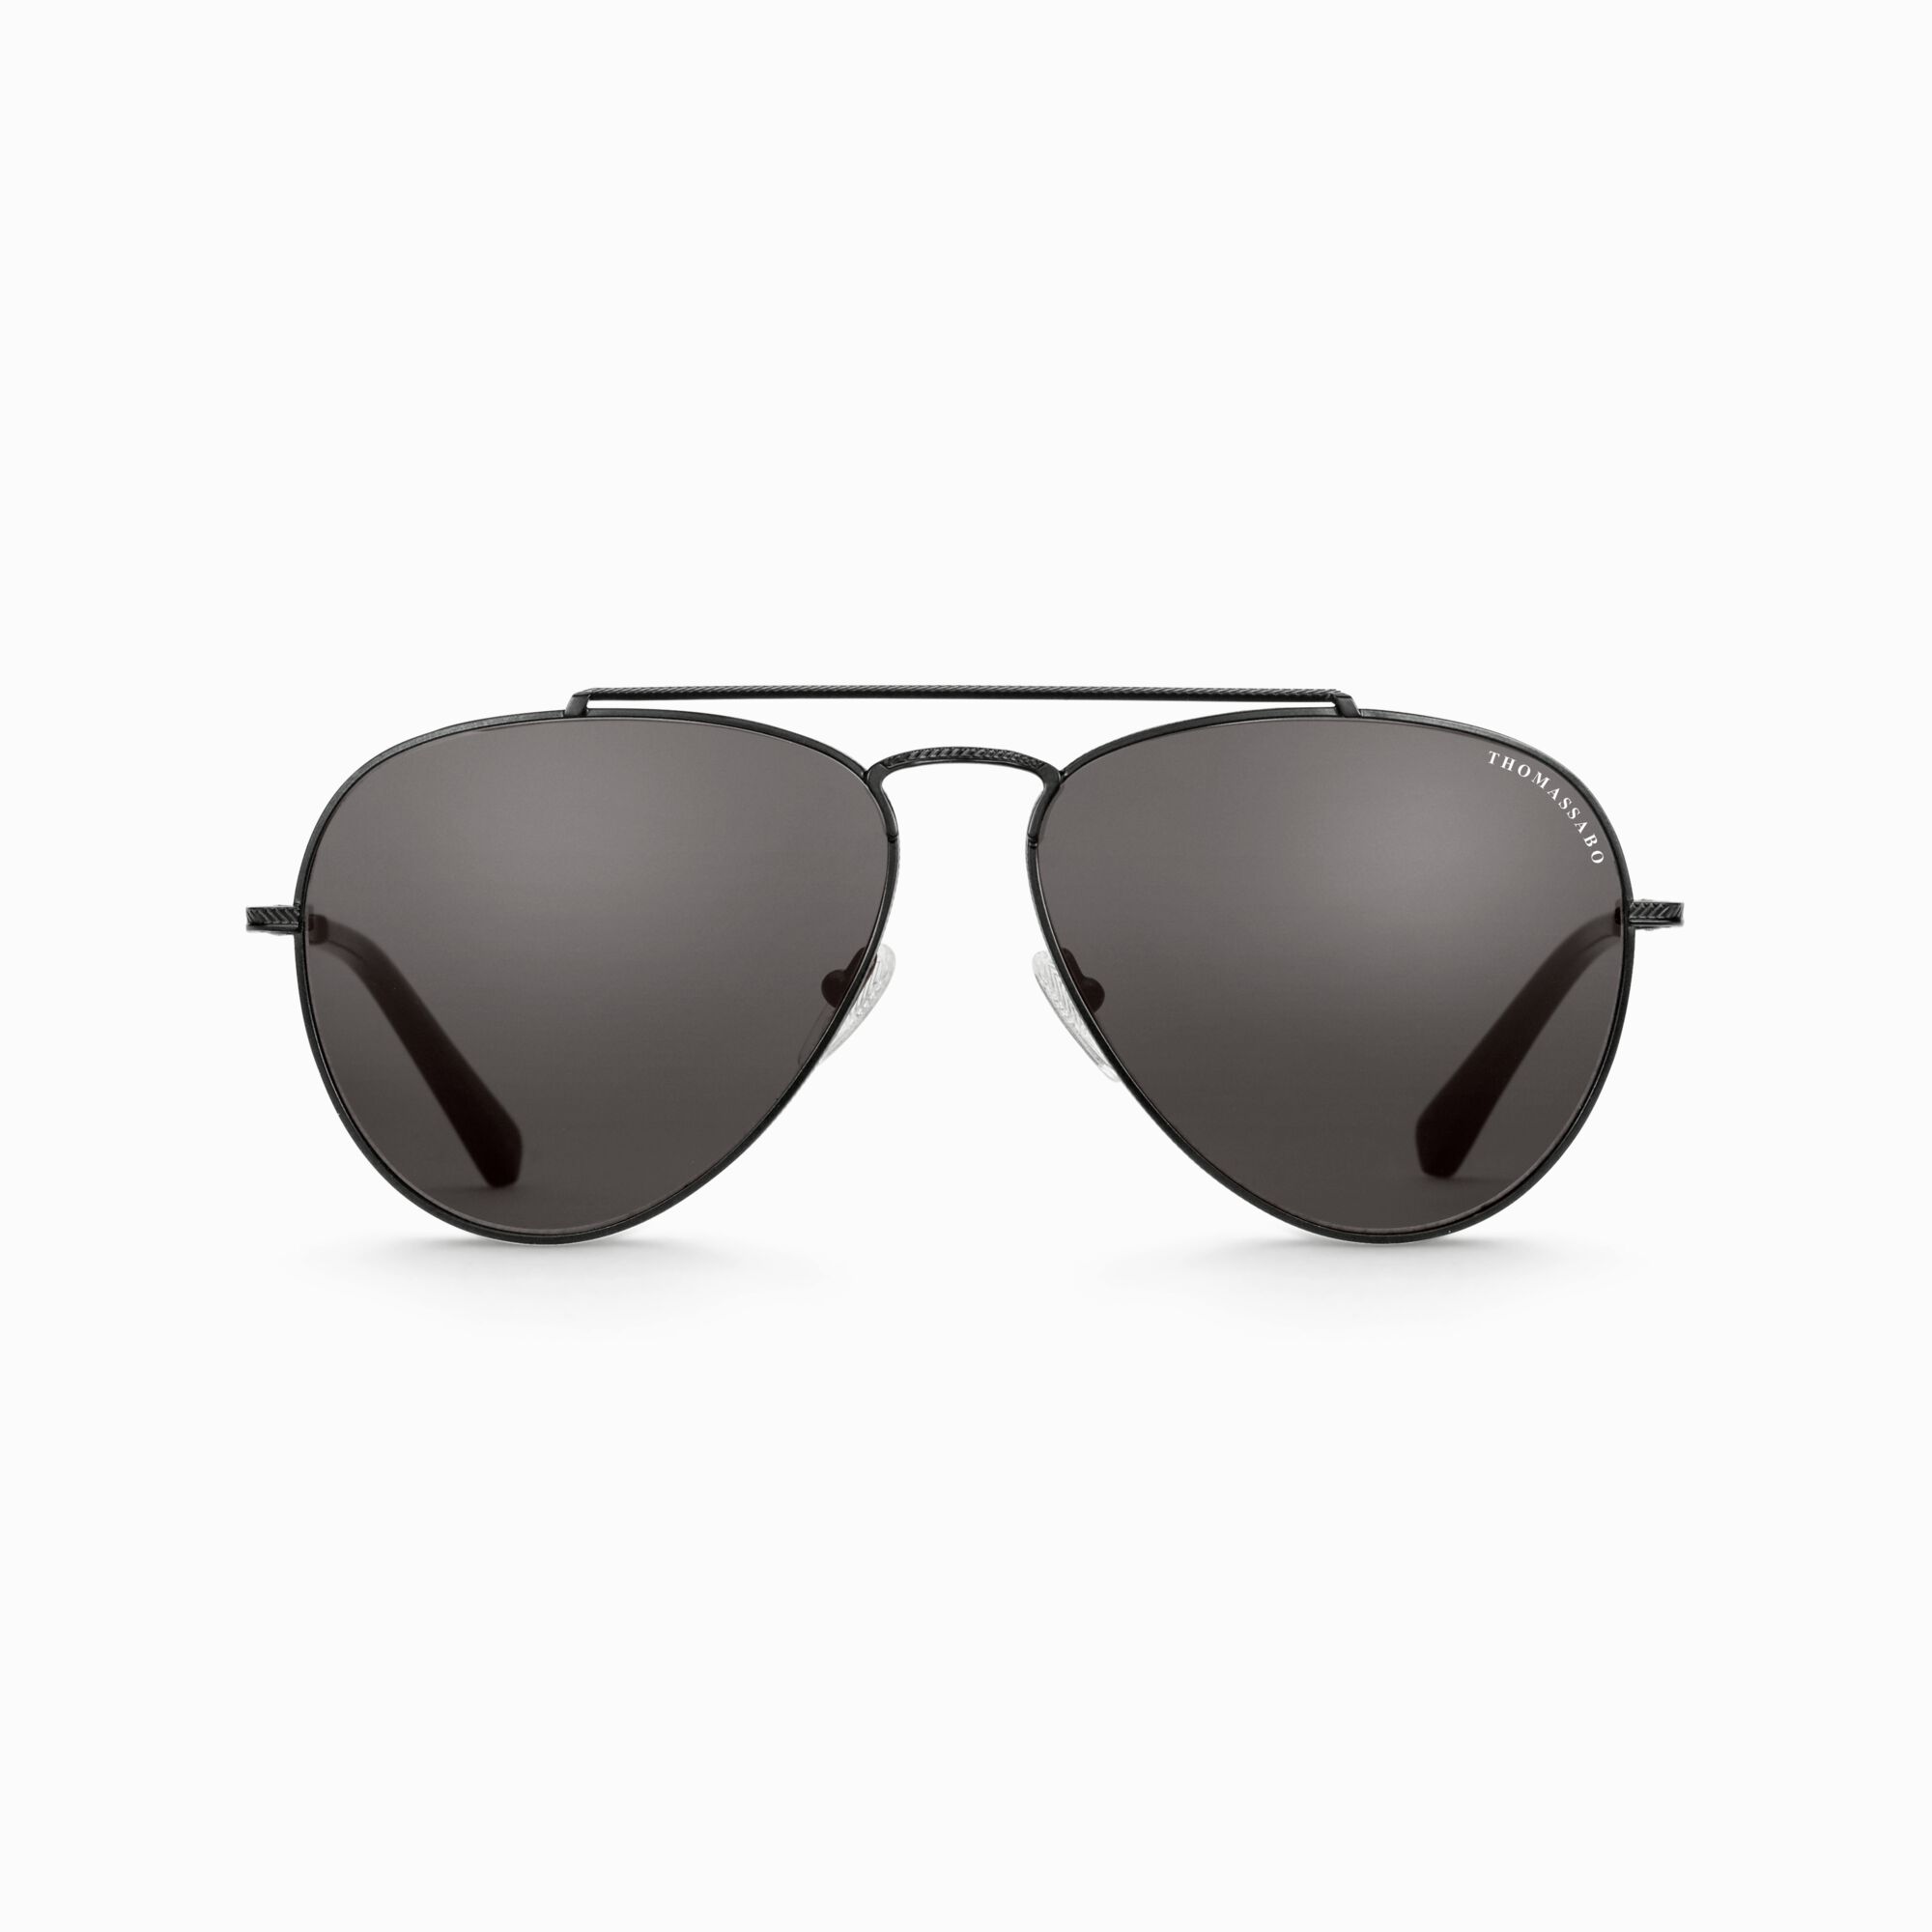 Sunglasses Harrison pilot from the  collection in the THOMAS SABO online store